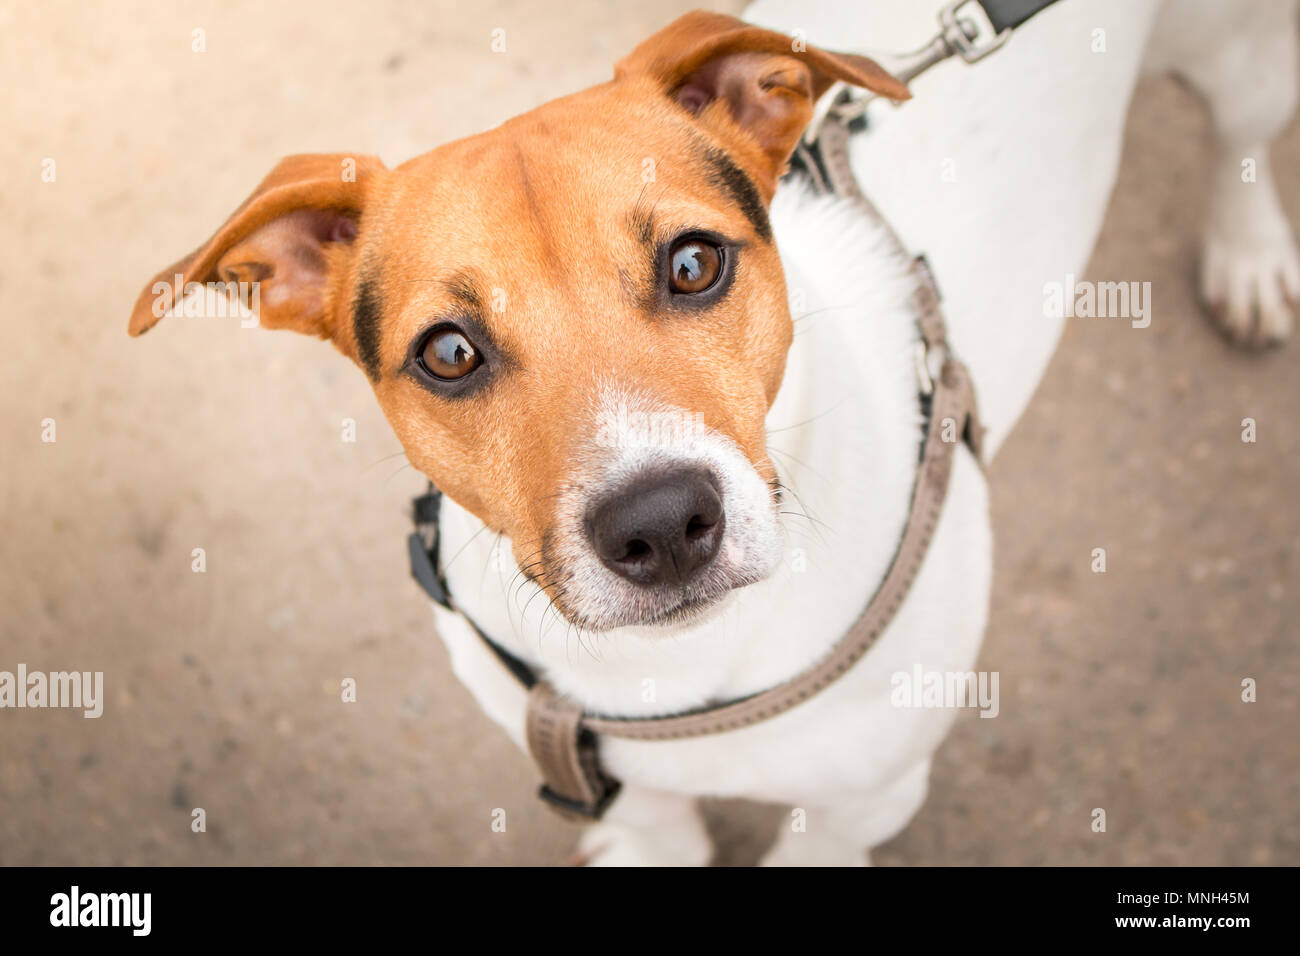 Jack Russell Terrier smart look. Smart look of the dog. A curious dog. Jack Russell Terrier on a leash. Expressive dog eyes look into the lens. A pet. Stock Photo